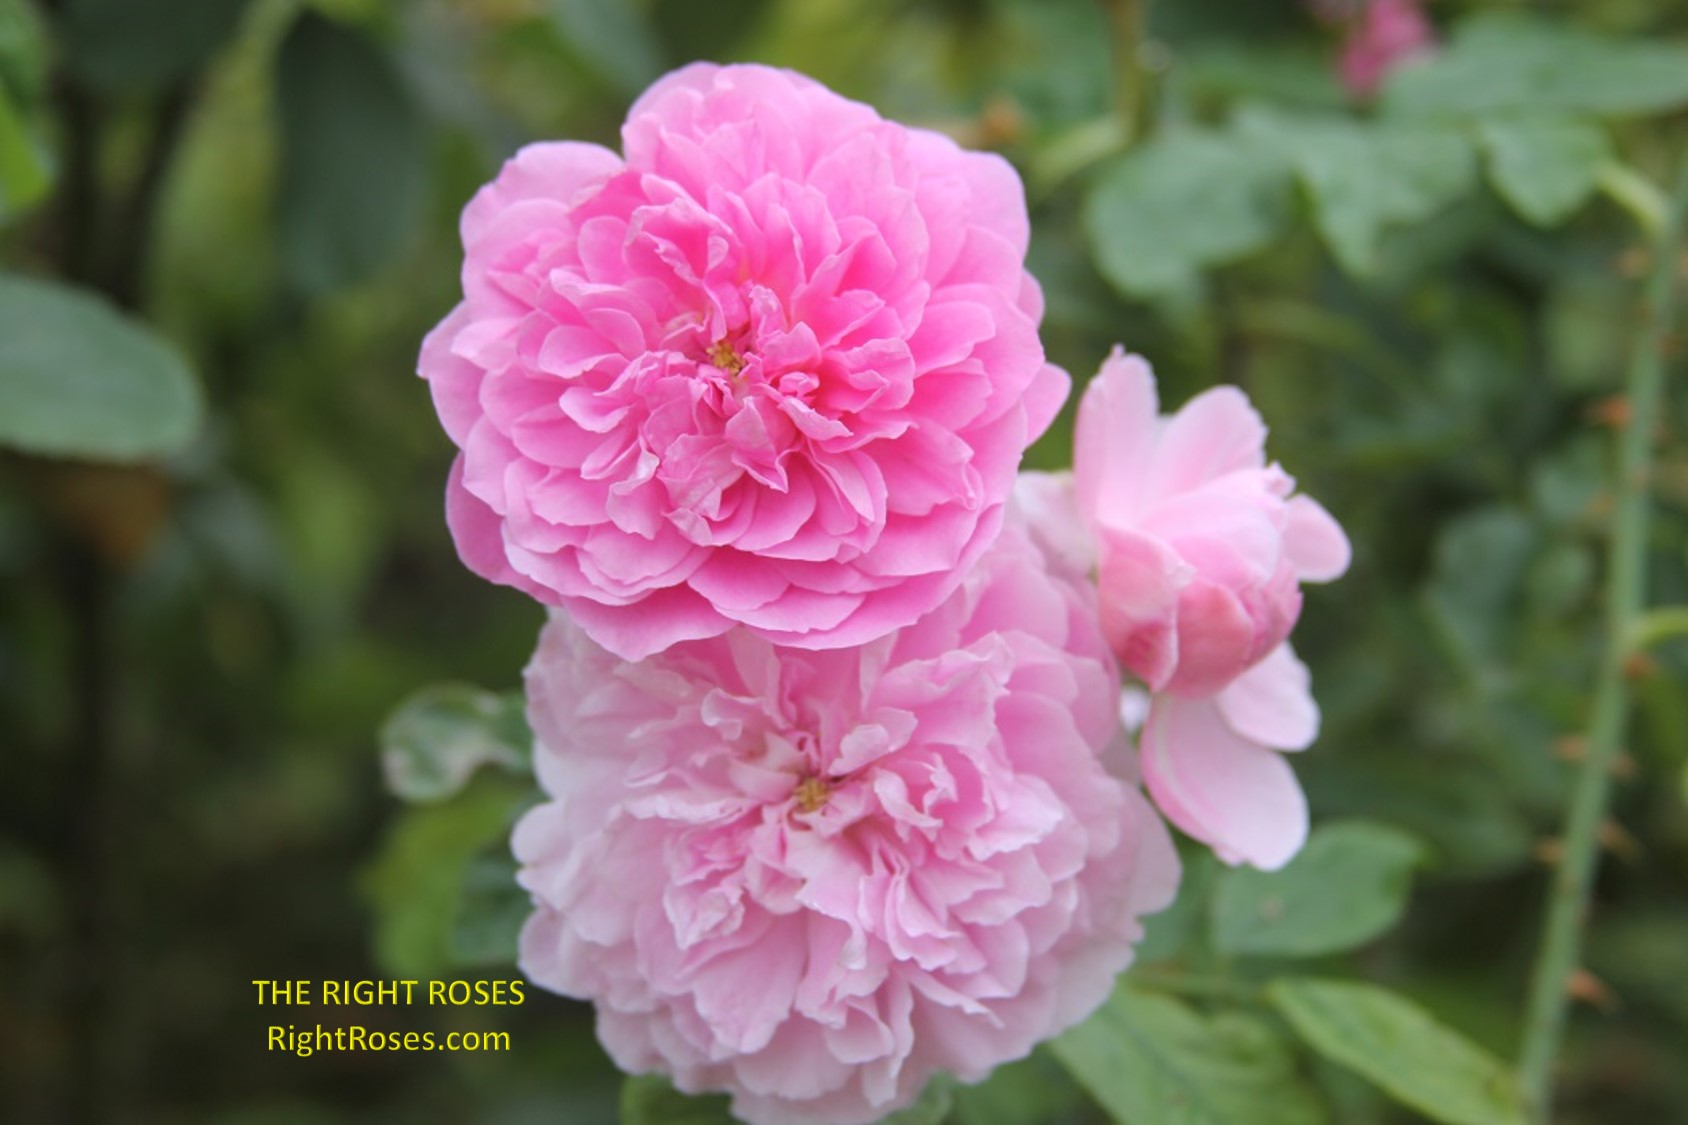 harlow carr rose review the right roses score best top garden store david austin english roses rose products rose rating the right leap rose food fertilizer